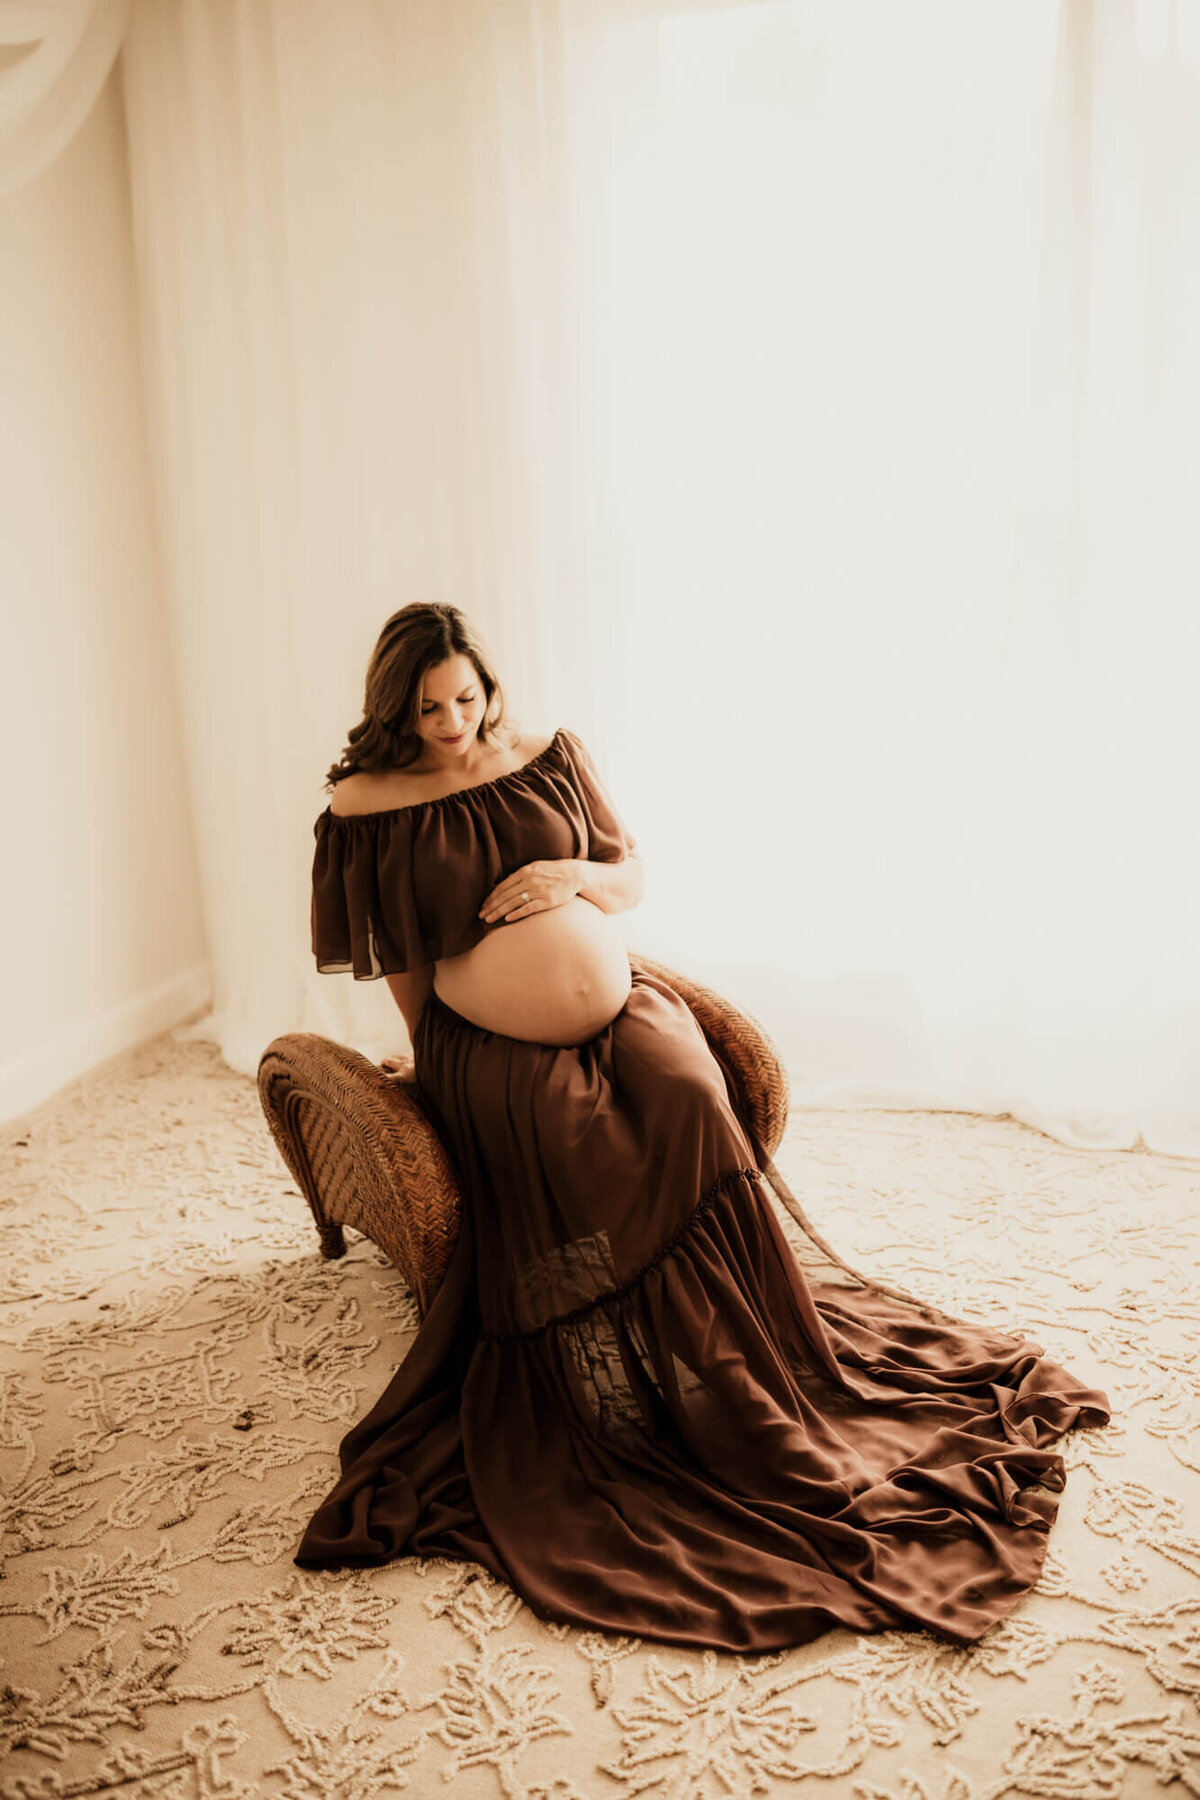 Mother in her third trimester looking at her baby bump while sitting on an ottoman.